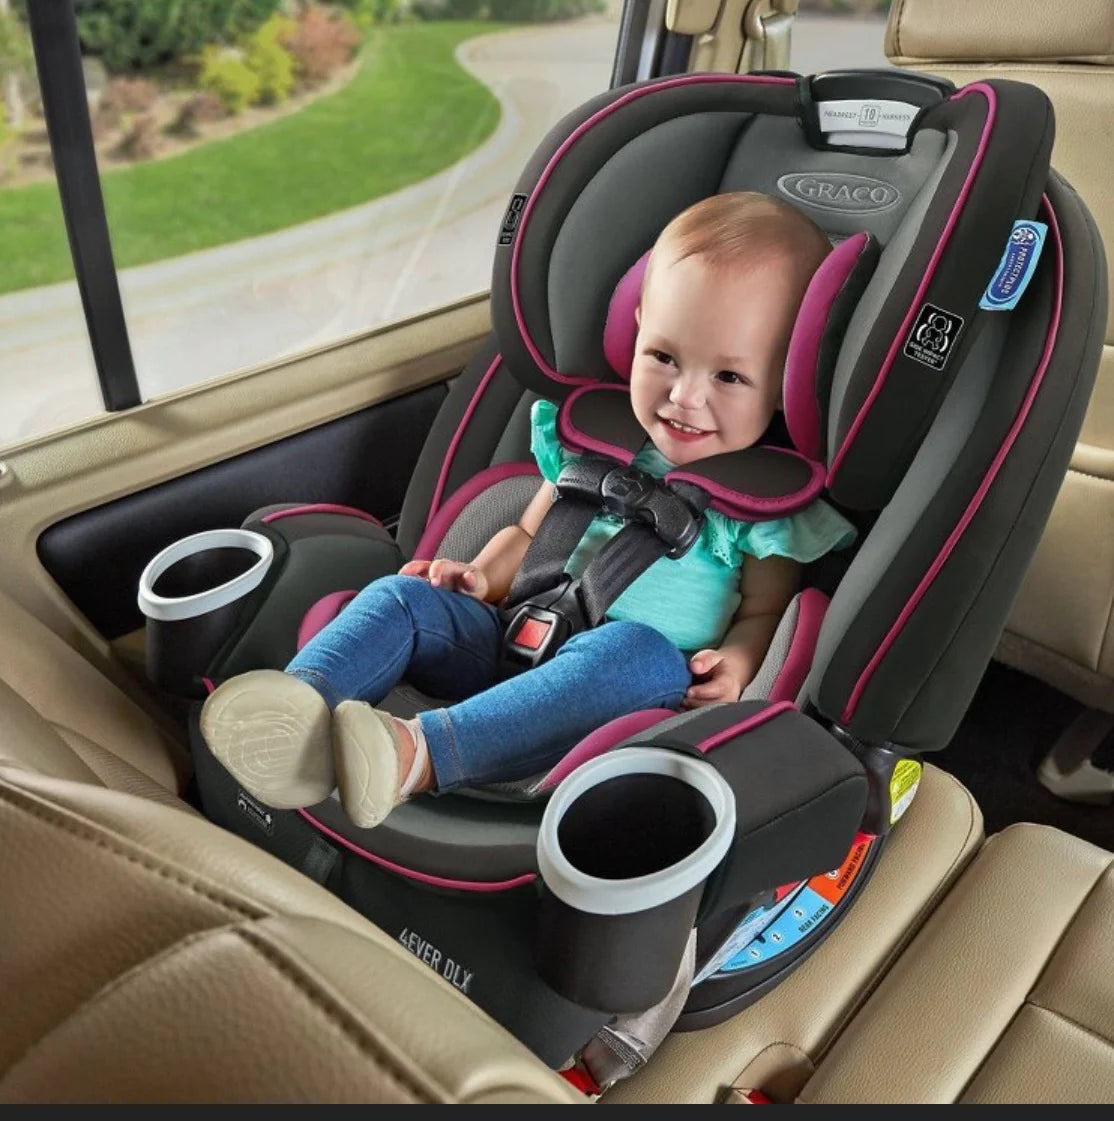 New Graco 4Ever DLX 4-in-1 Convertible Car Seat - Rylah